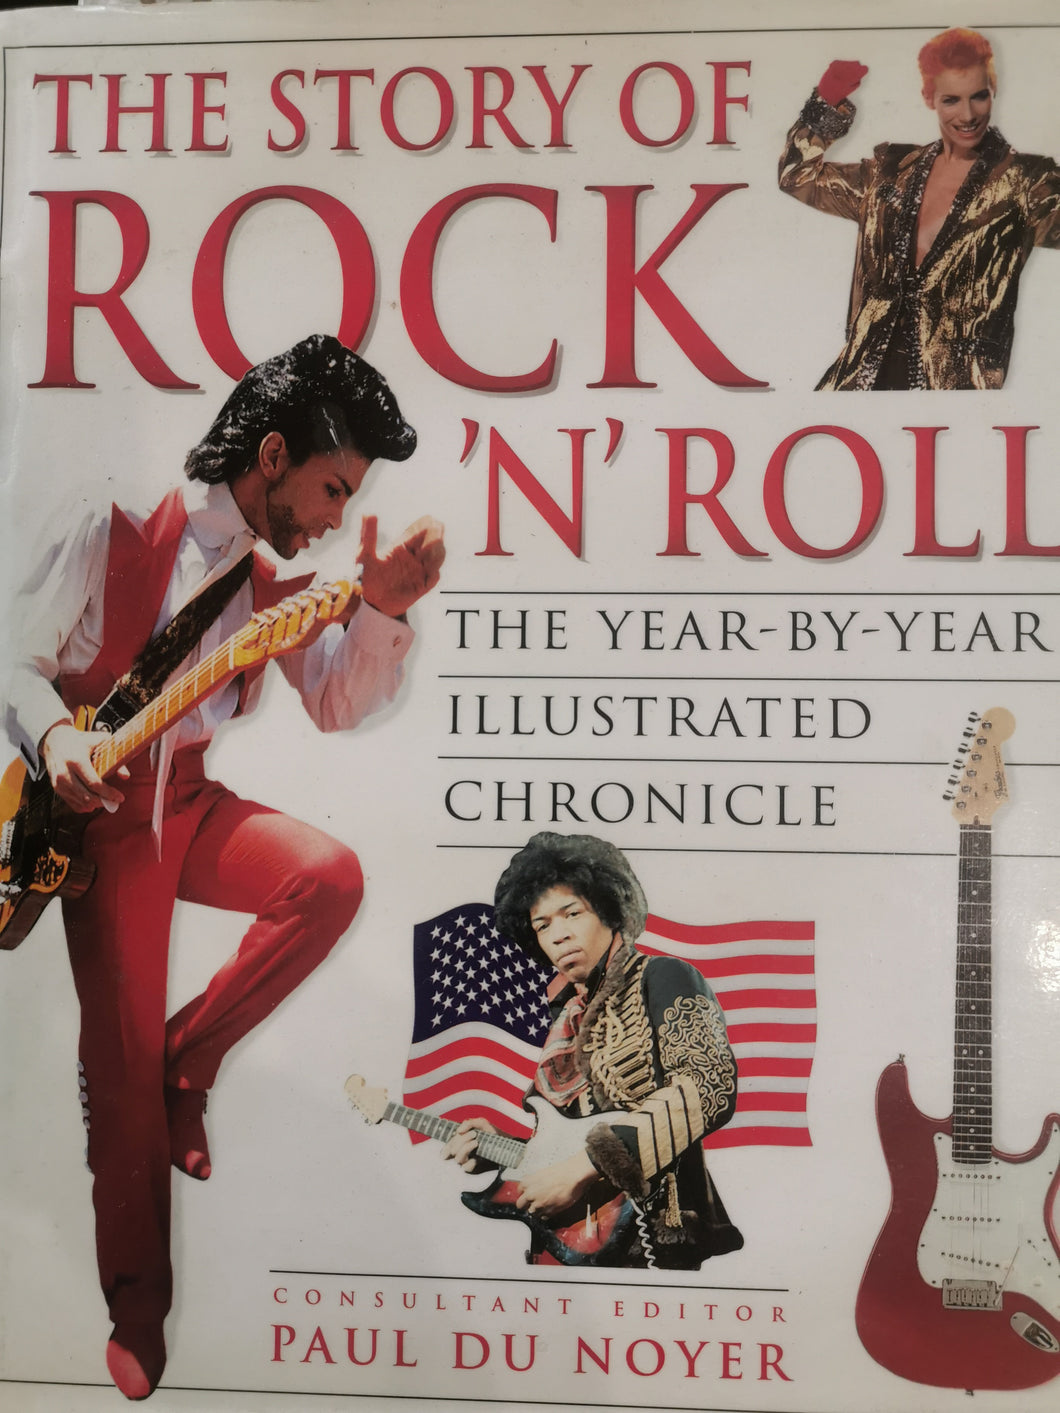 The Story of Rock 'n' Roll: Year by Year Illustrated Chronicle